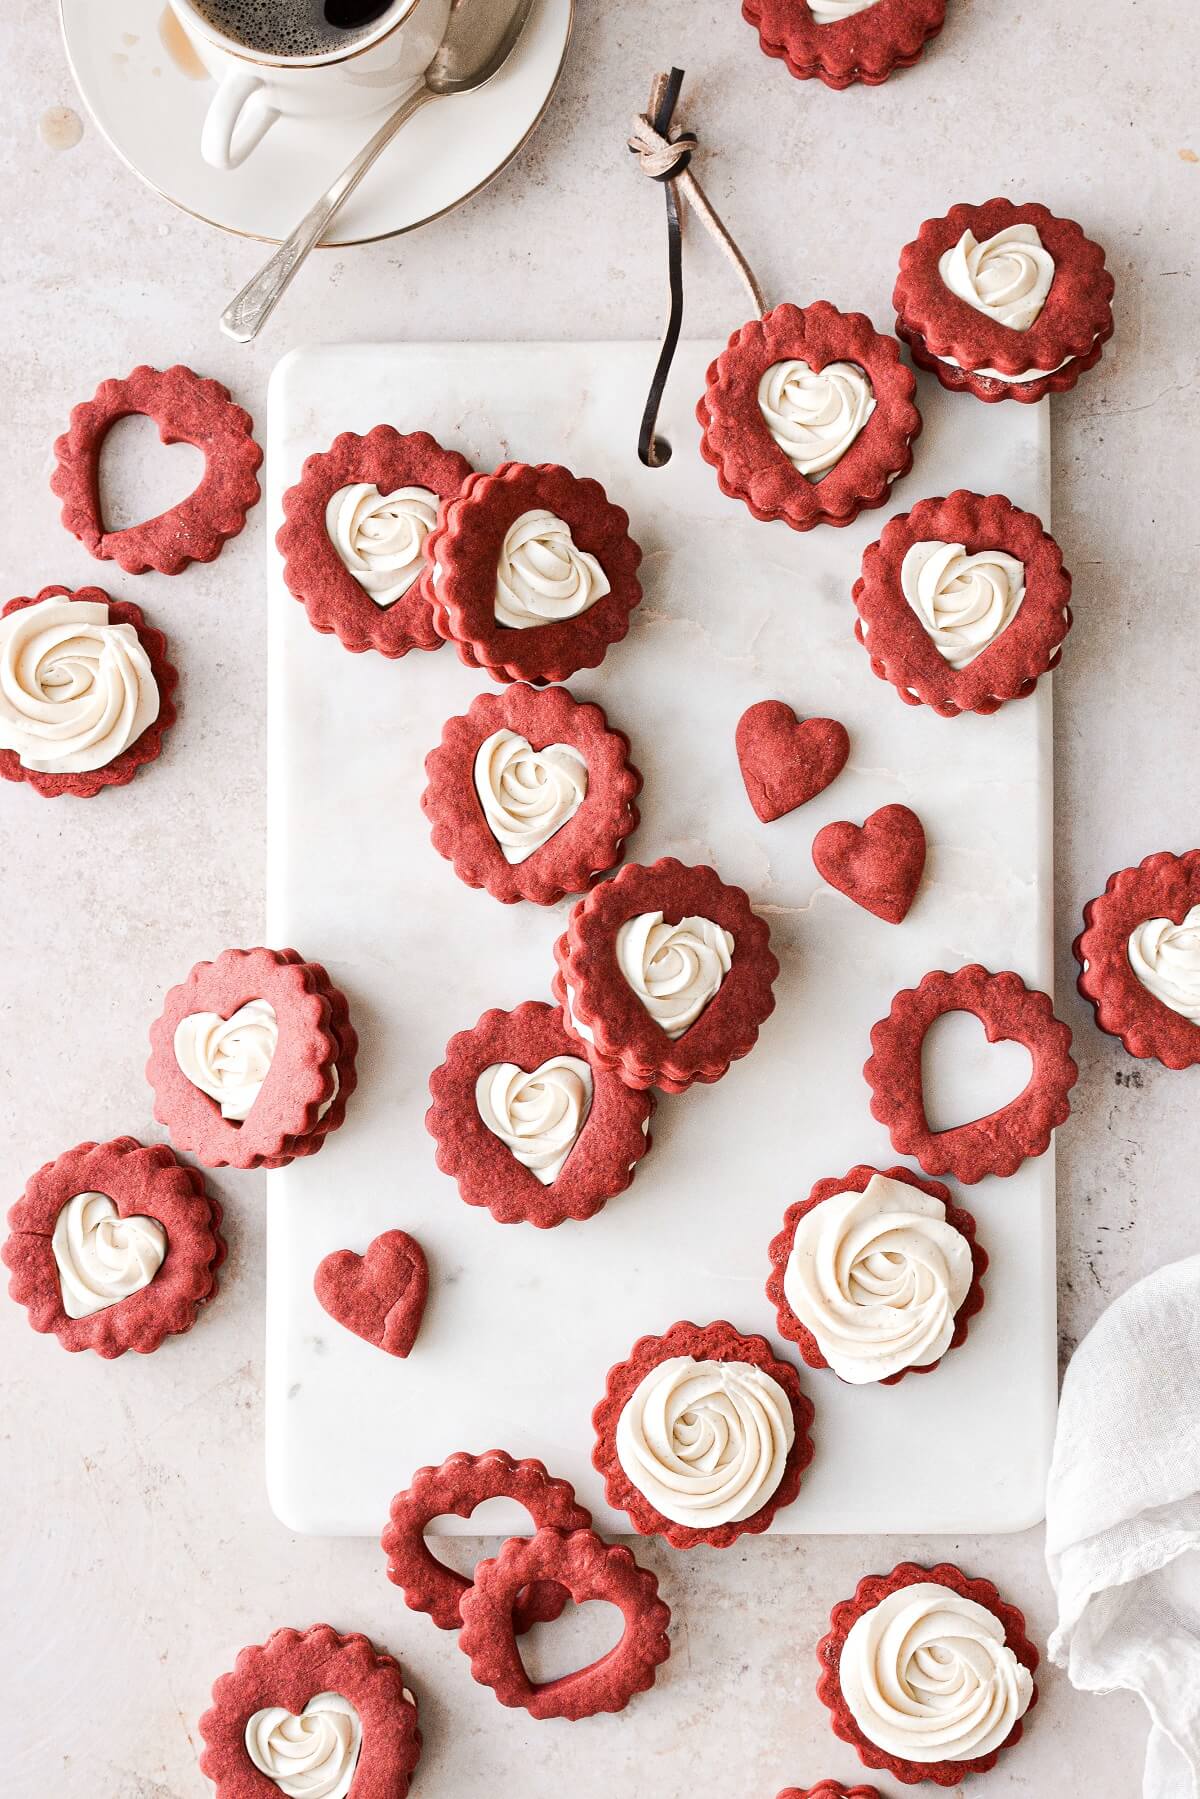 Red and white Valentines Linzer cookies filled with buttercream rosettes.